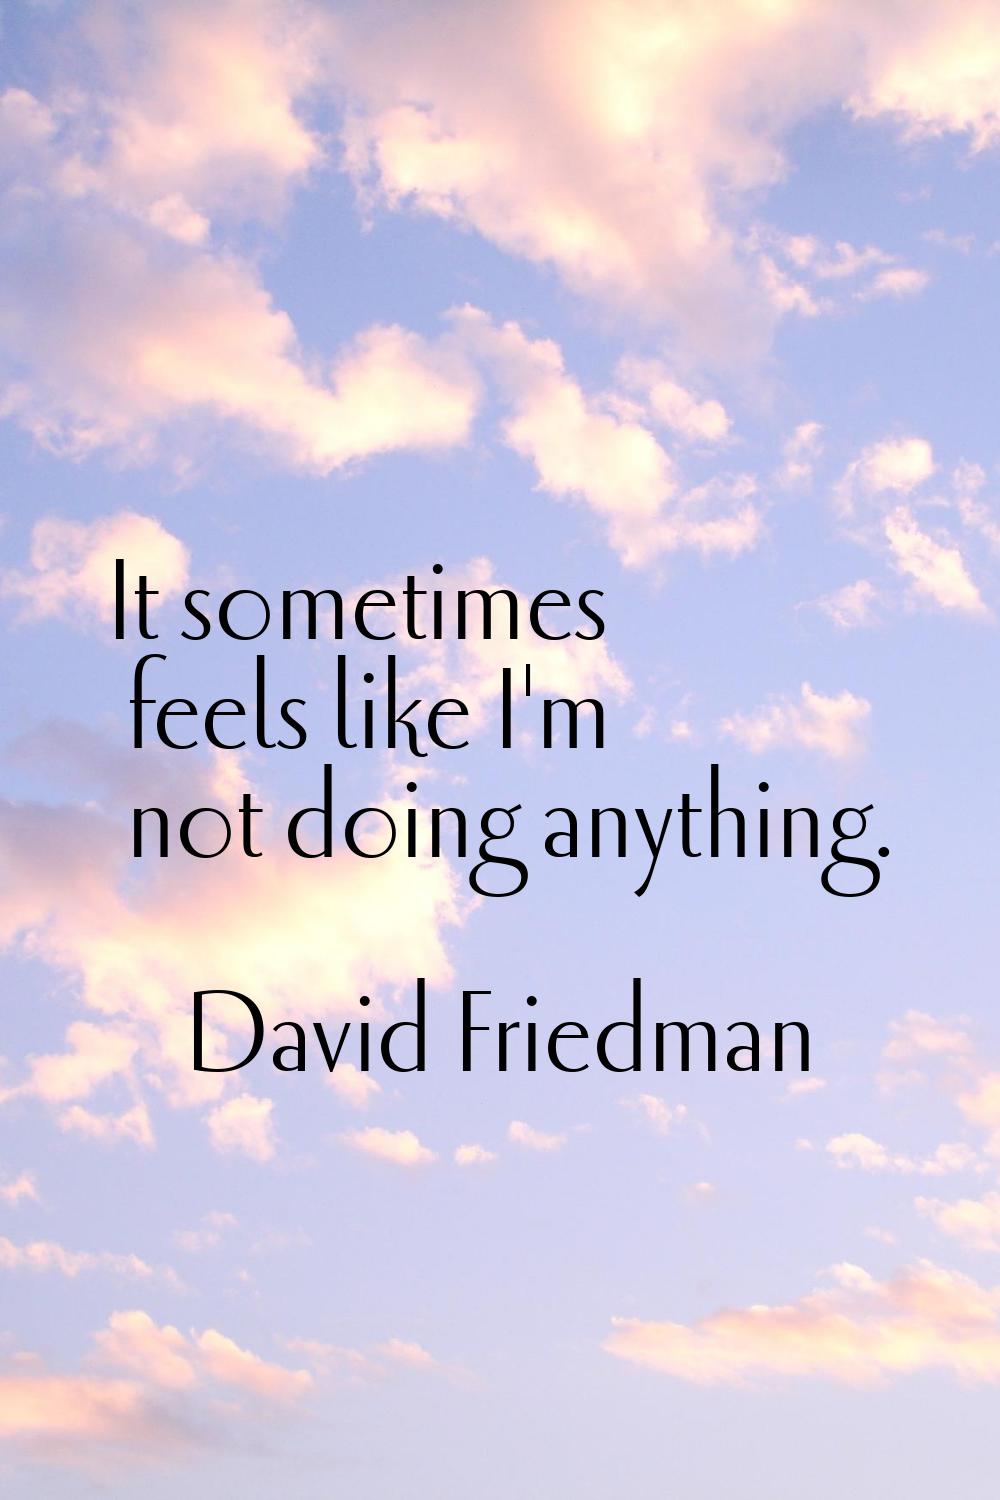 It sometimes feels like I'm not doing anything.